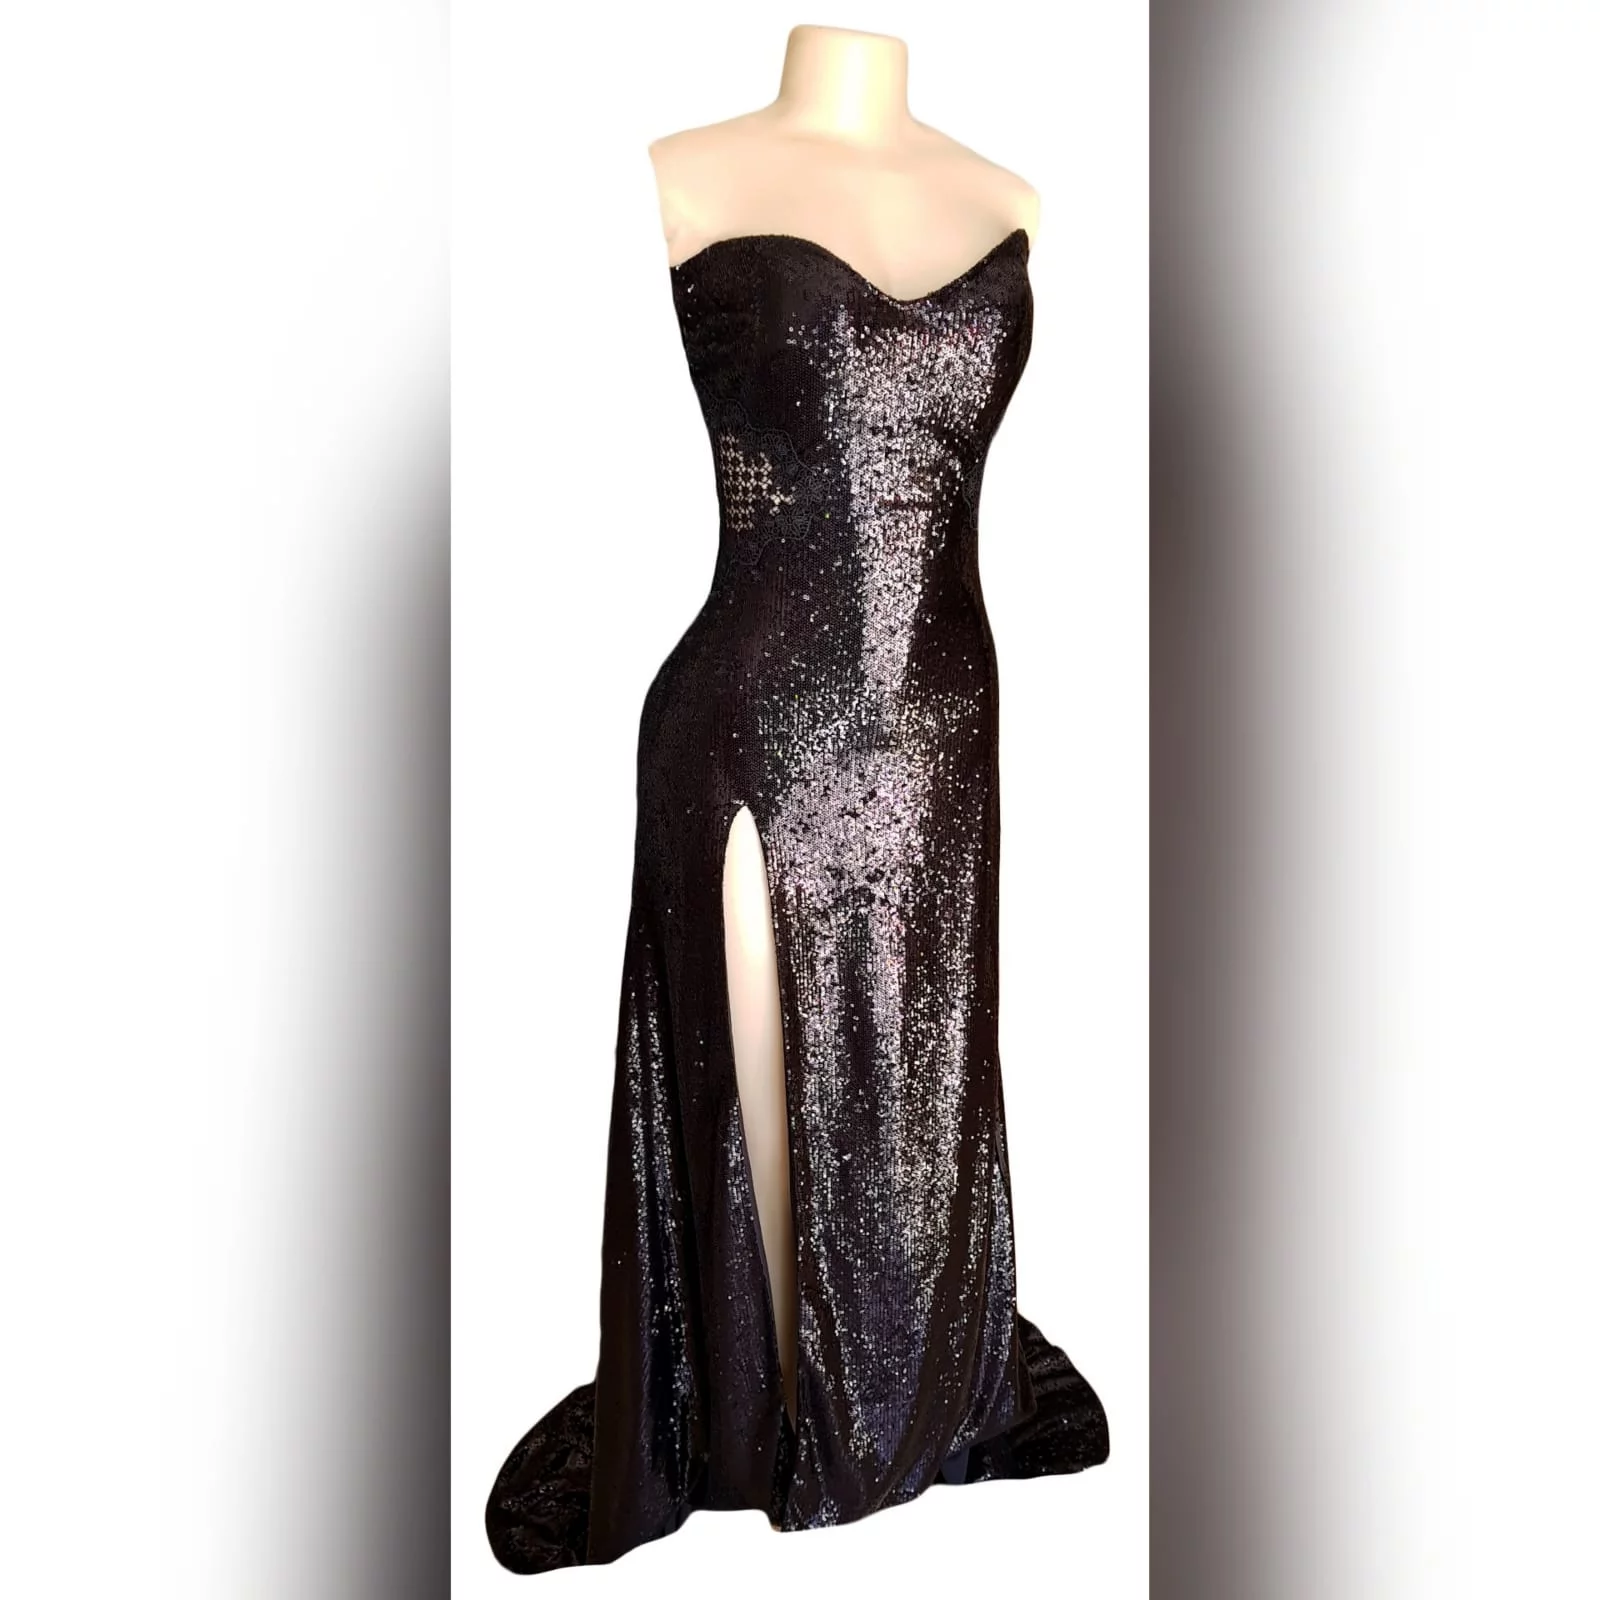 Long black sequins boob tube matric farewell dress 5 long black sequins boob tube matric farewell dress with a sheer lace back and side tummy. High slit and a train.